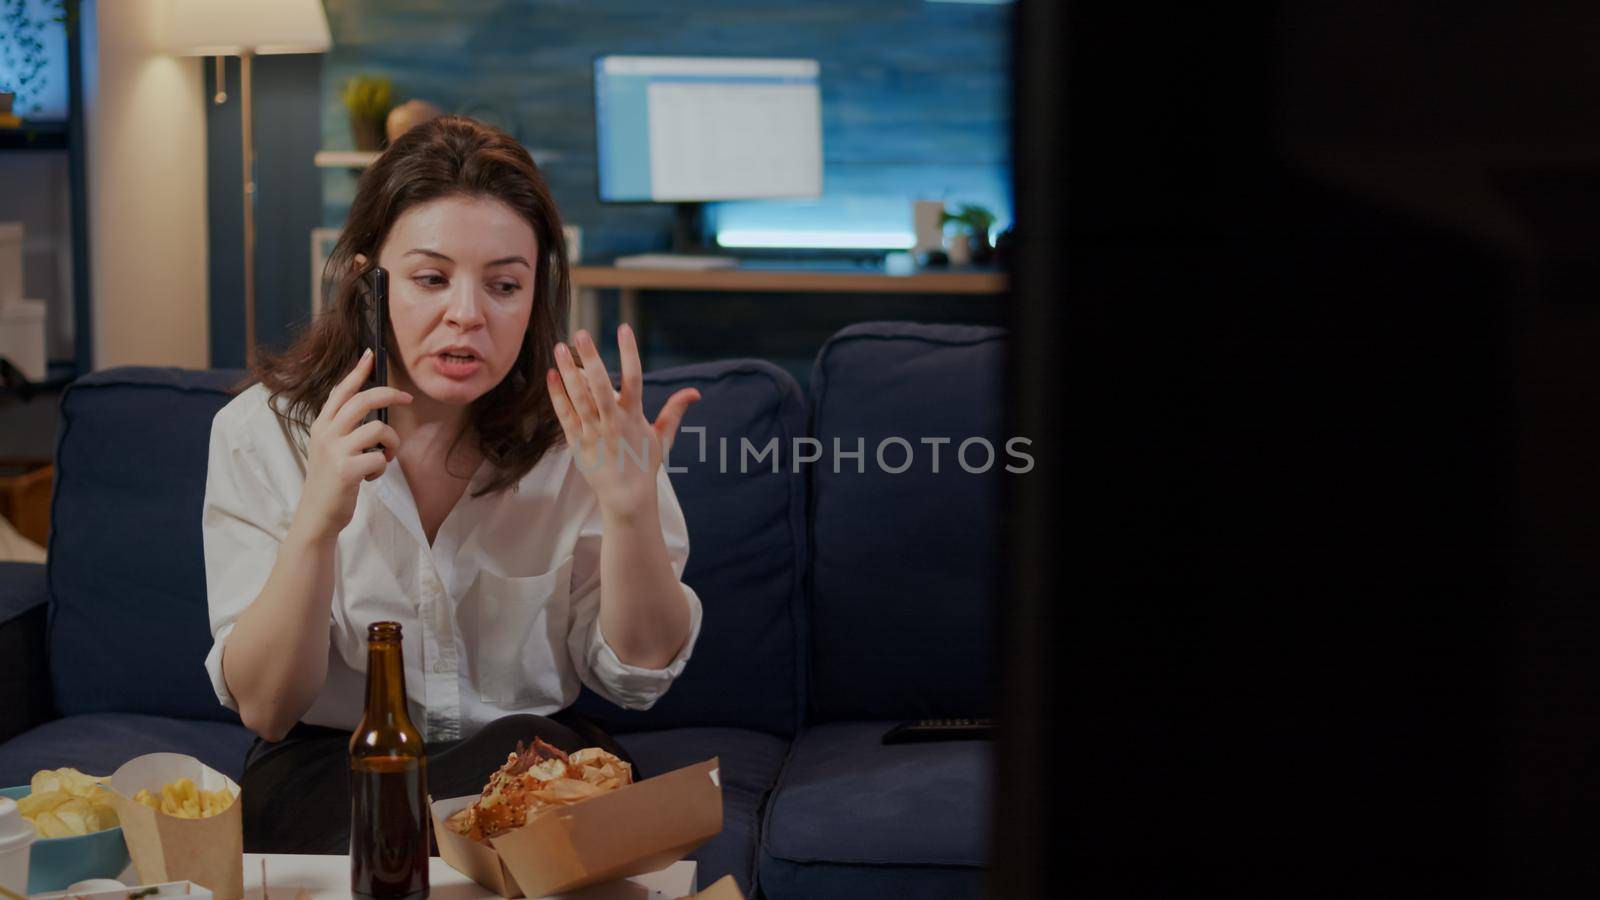 Annoyed woman talking on smartphone with boss after work at home while trying to eat takeaway food from delivery boxes. Person with fast food meal on table using phone for work call